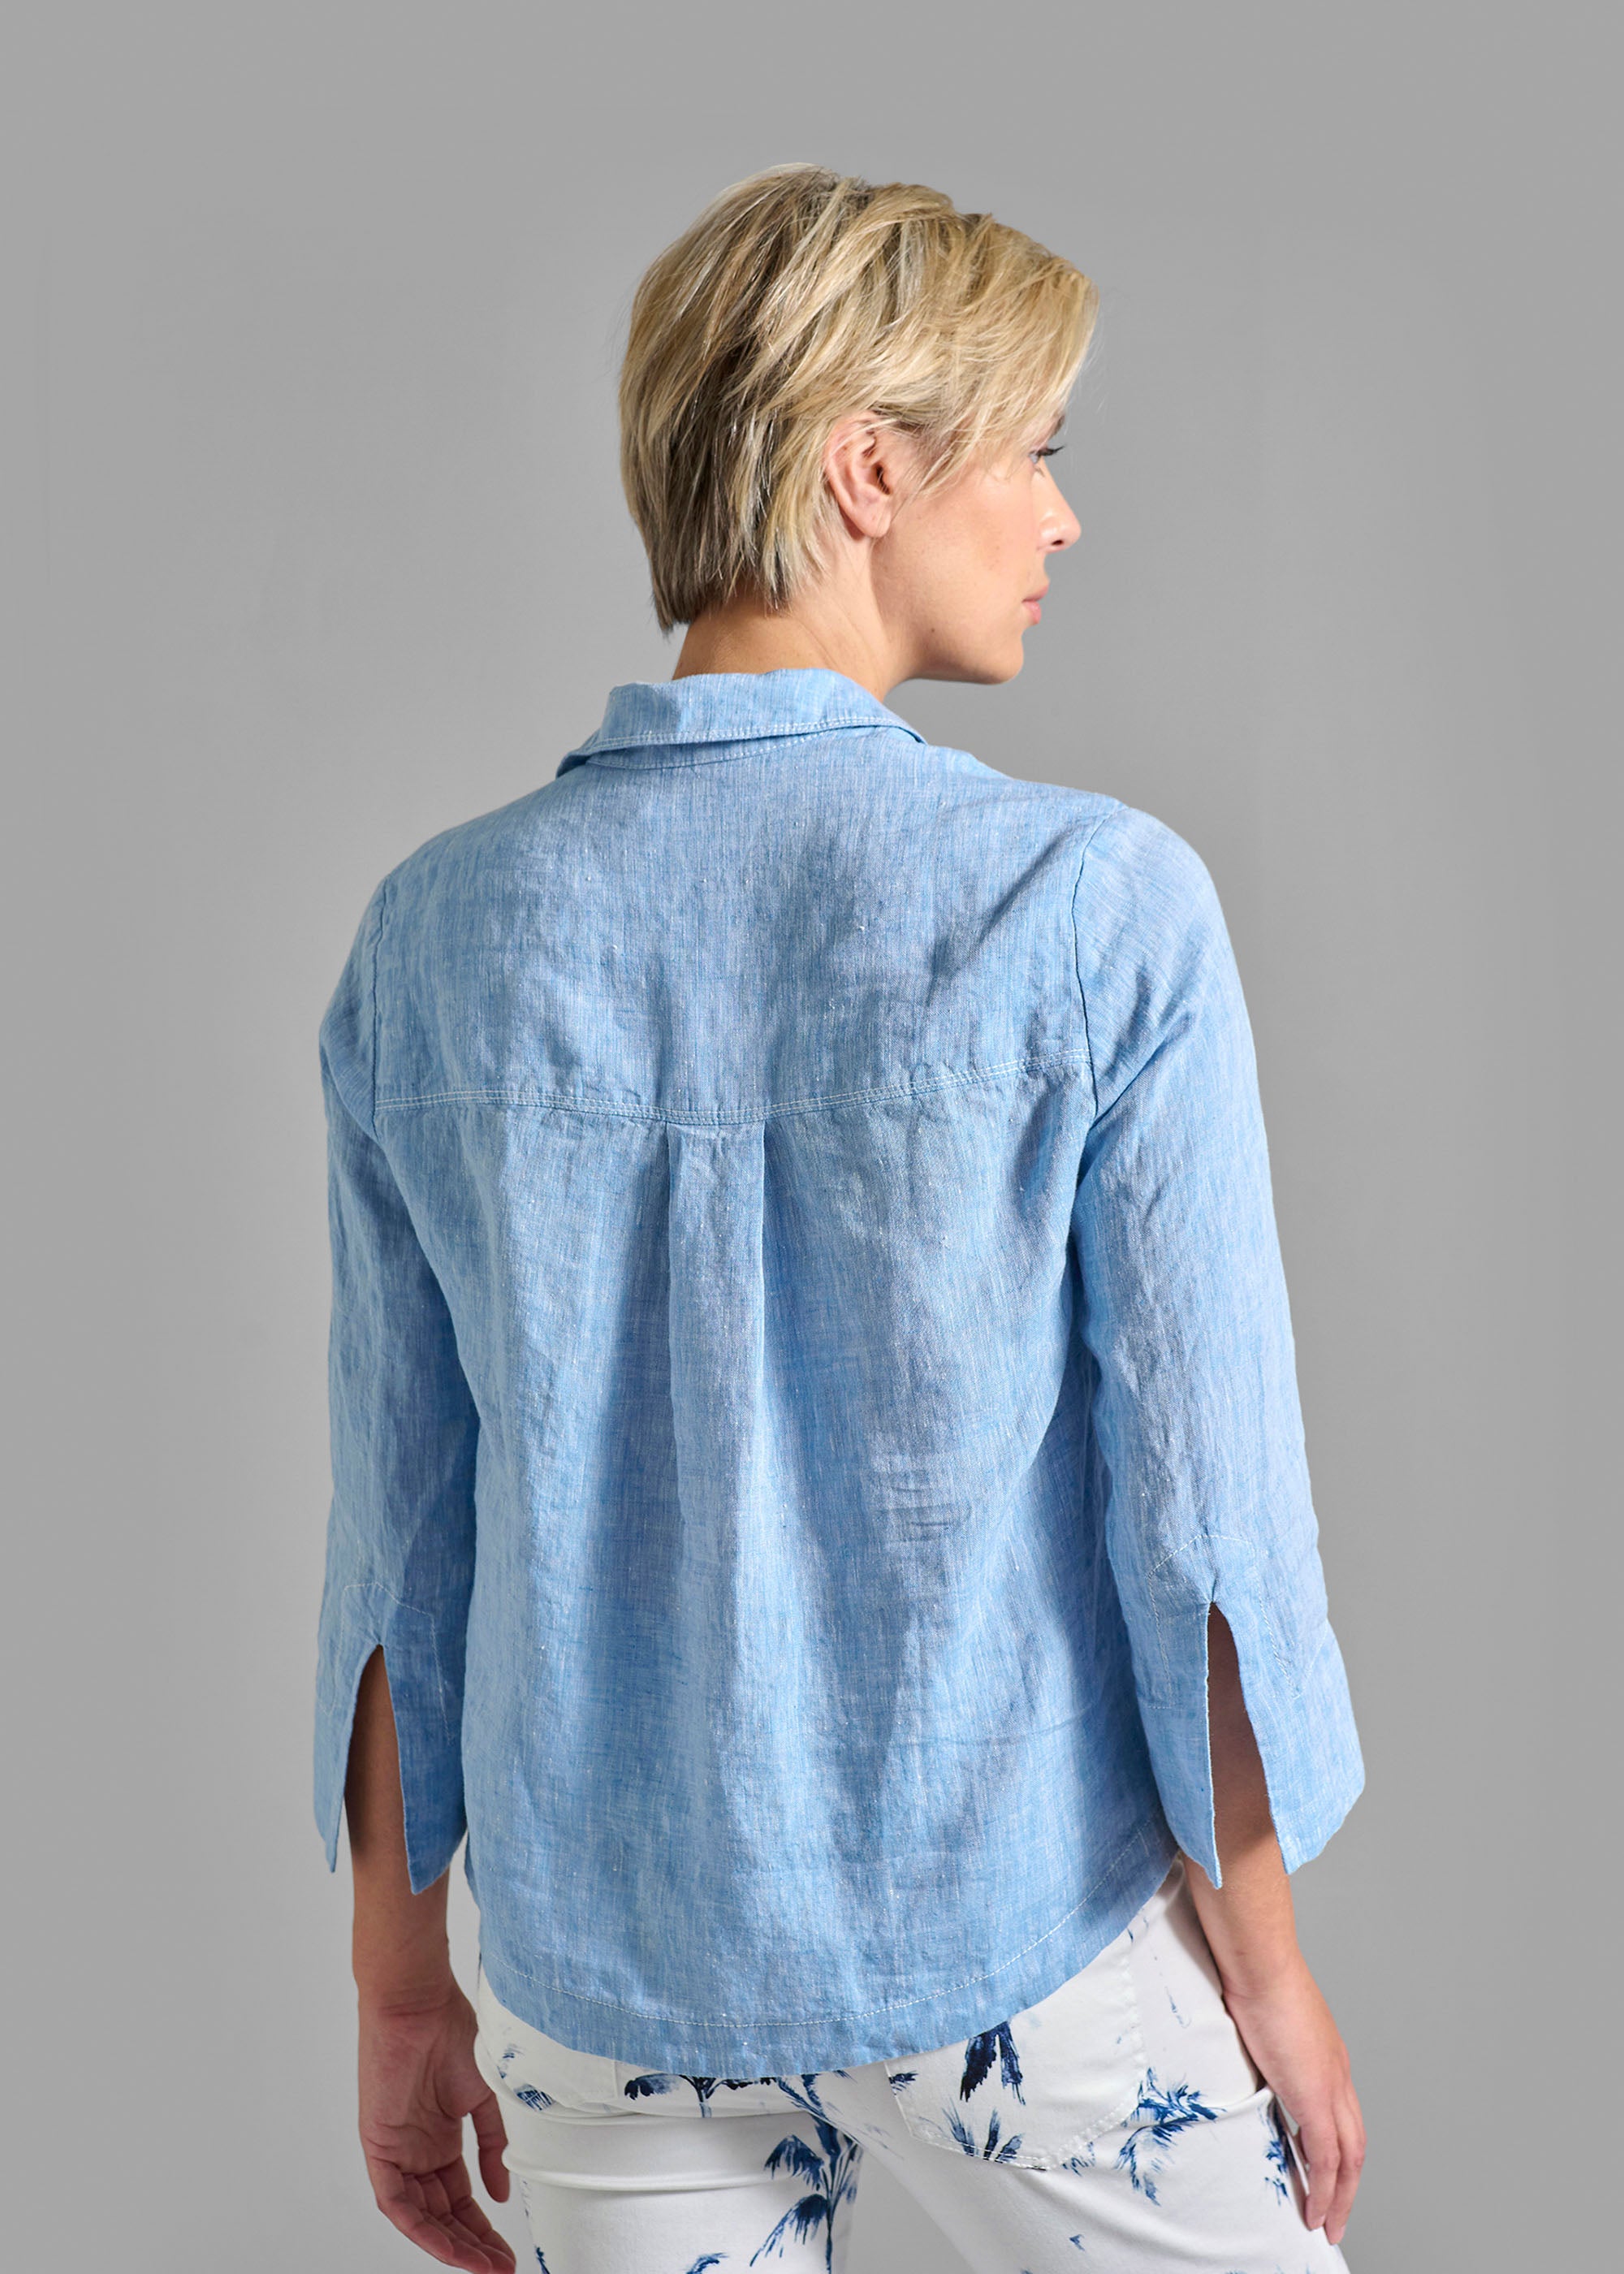 Bluse Modell "Wendy"